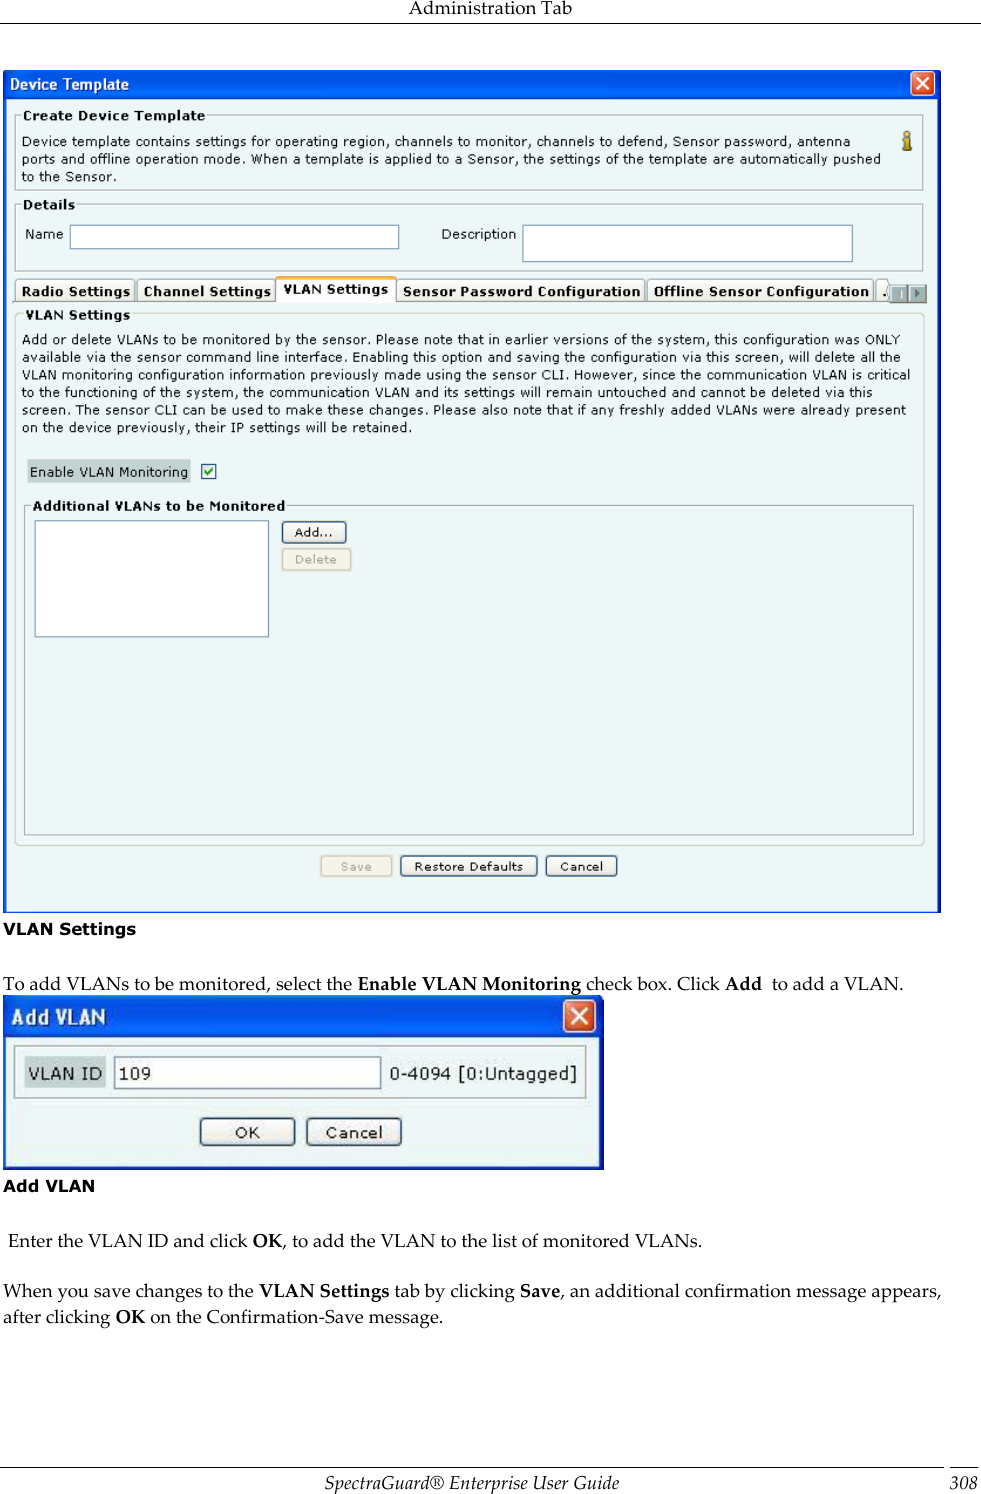 Administration Tab SpectraGuard®  Enterprise User Guide 308  VLAN Settings   To add VLANs to be monitored, select the Enable VLAN Monitoring check box. Click Add  to add a VLAN.  Add VLAN    Enter the VLAN ID and click OK, to add the VLAN to the list of monitored VLANs.   When you save changes to the VLAN Settings tab by clicking Save, an additional confirmation message appears, after clicking OK on the Confirmation-Save message. 